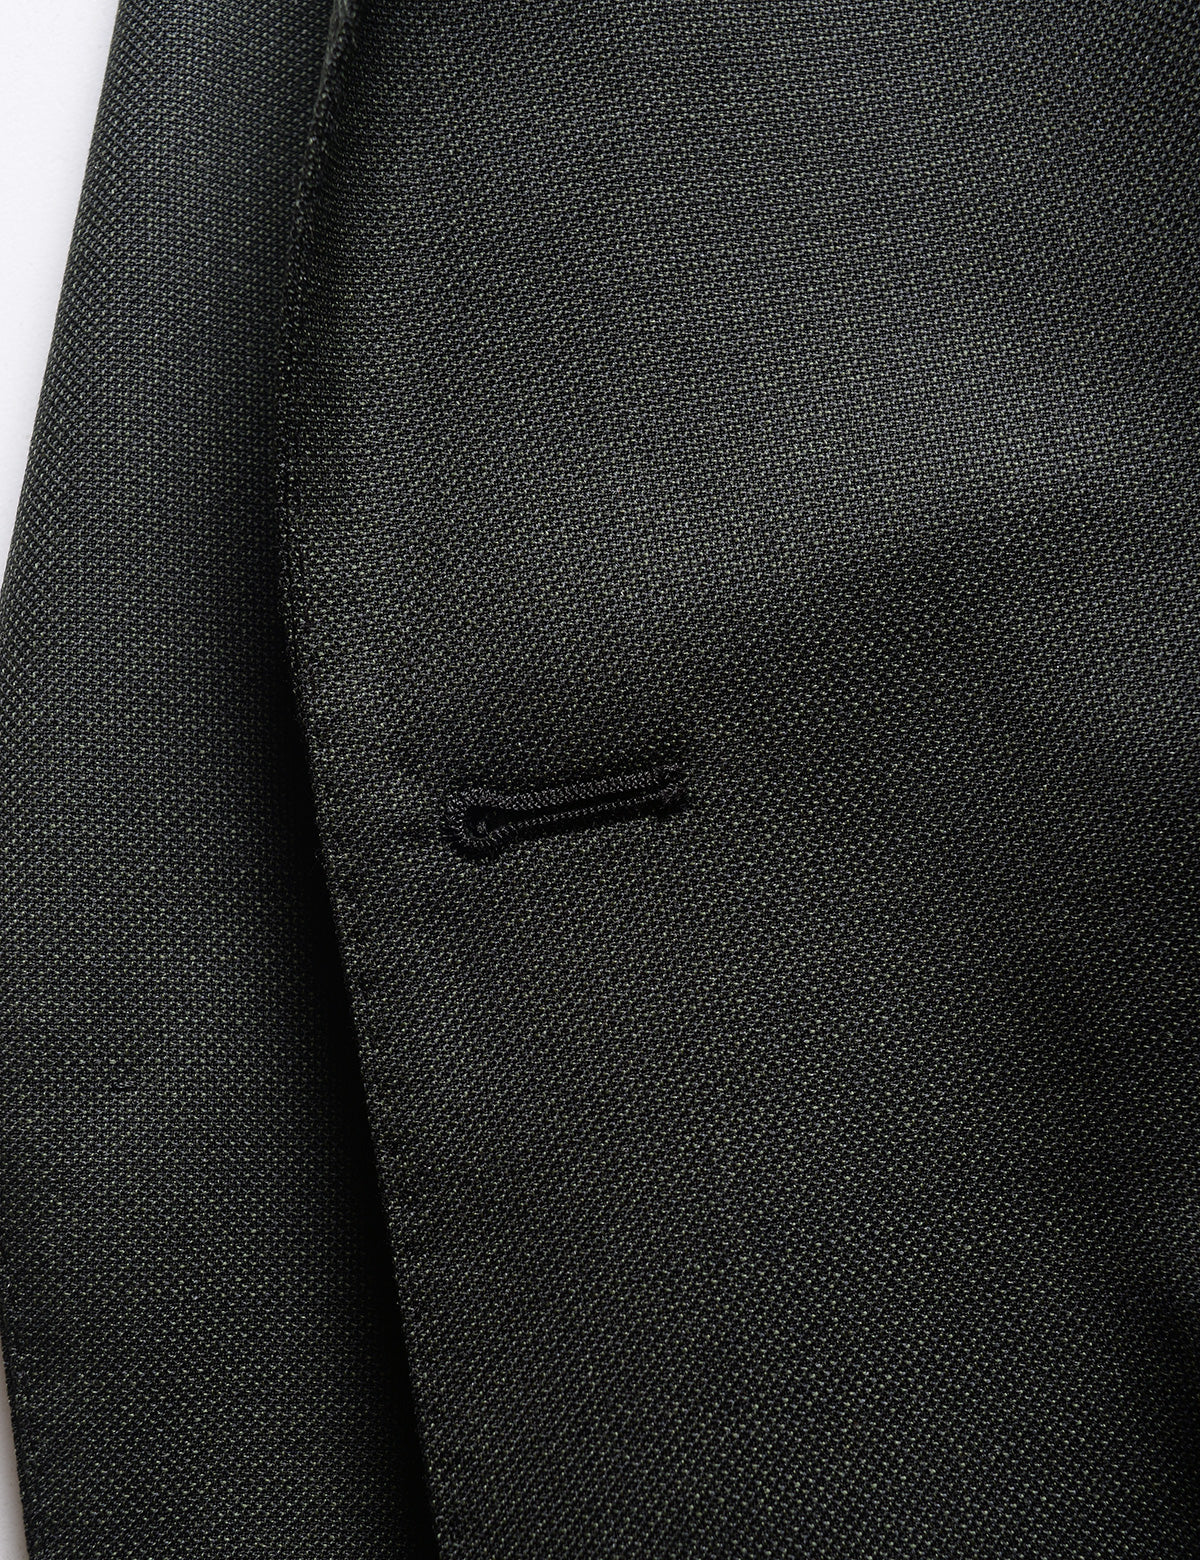 Detail shot of Brooklyn Tailors BKT50 Tailored Jacket in Textured Wool - Wrought Iron showing fabric texture and buttonhole